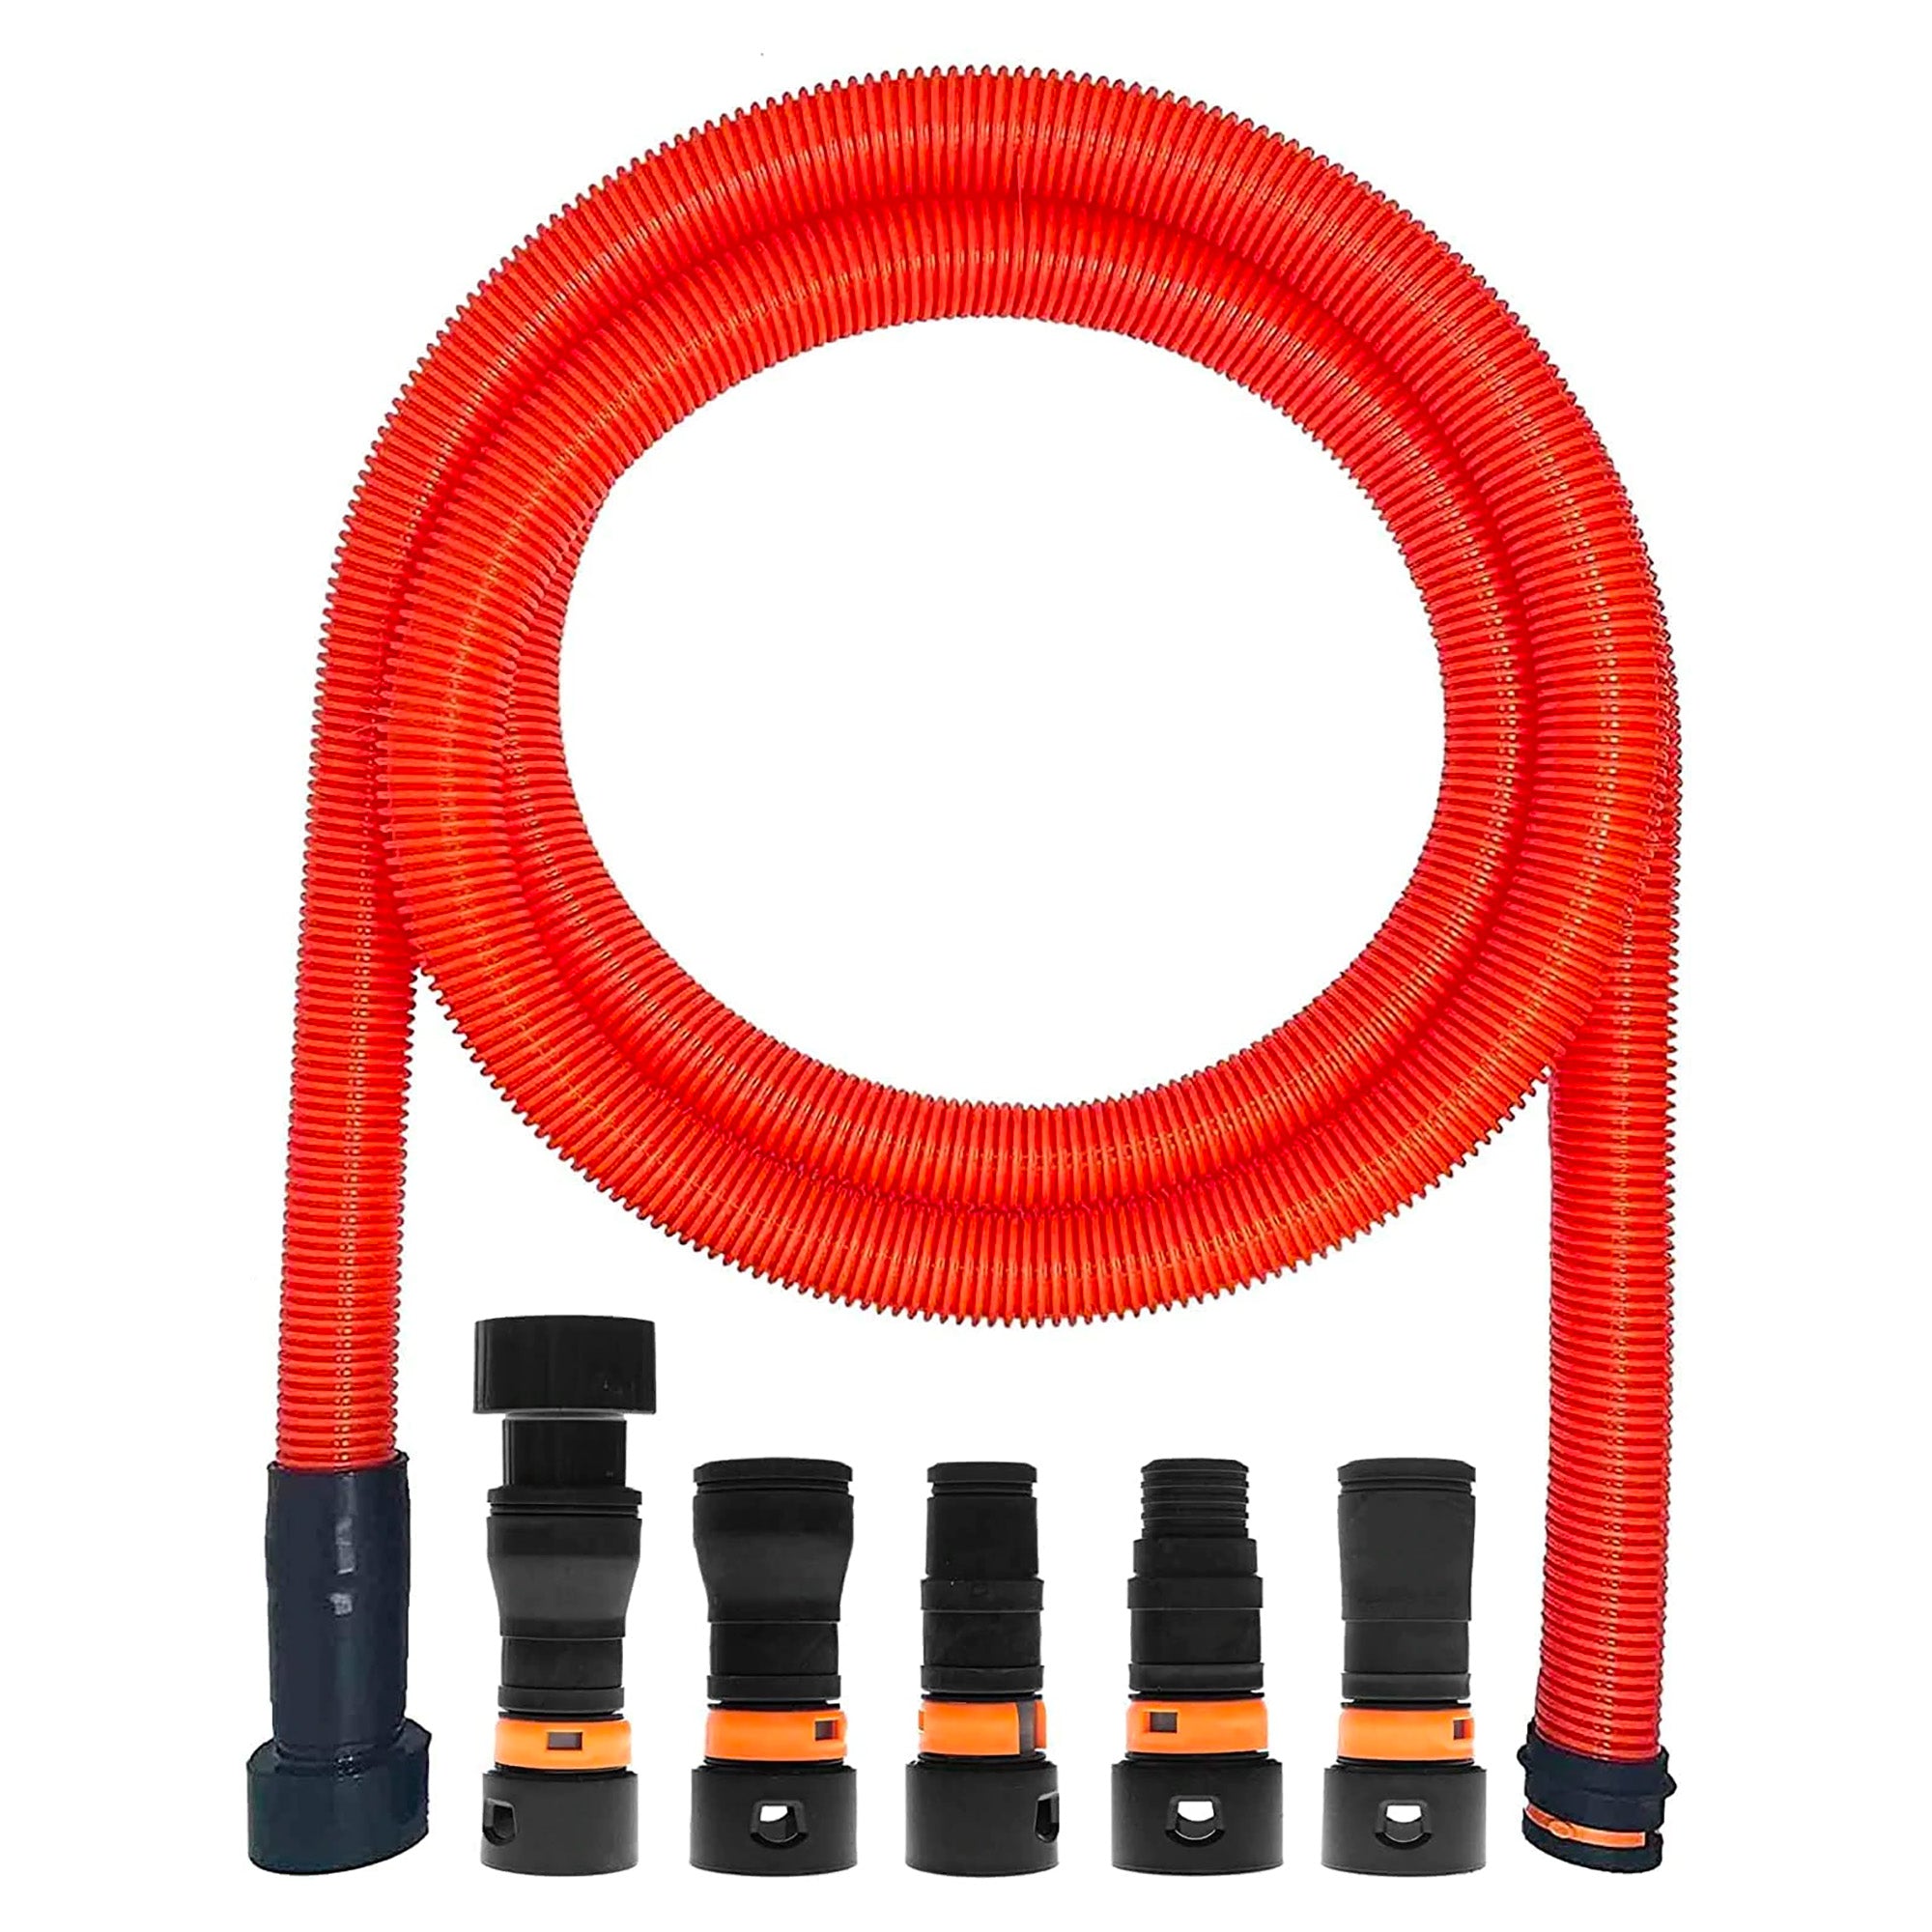 VPC Dust Collection Hose for Home and Shop Vacuums with Expanded Multi-Brand Power Tool Adapter Set Fittings | Orange